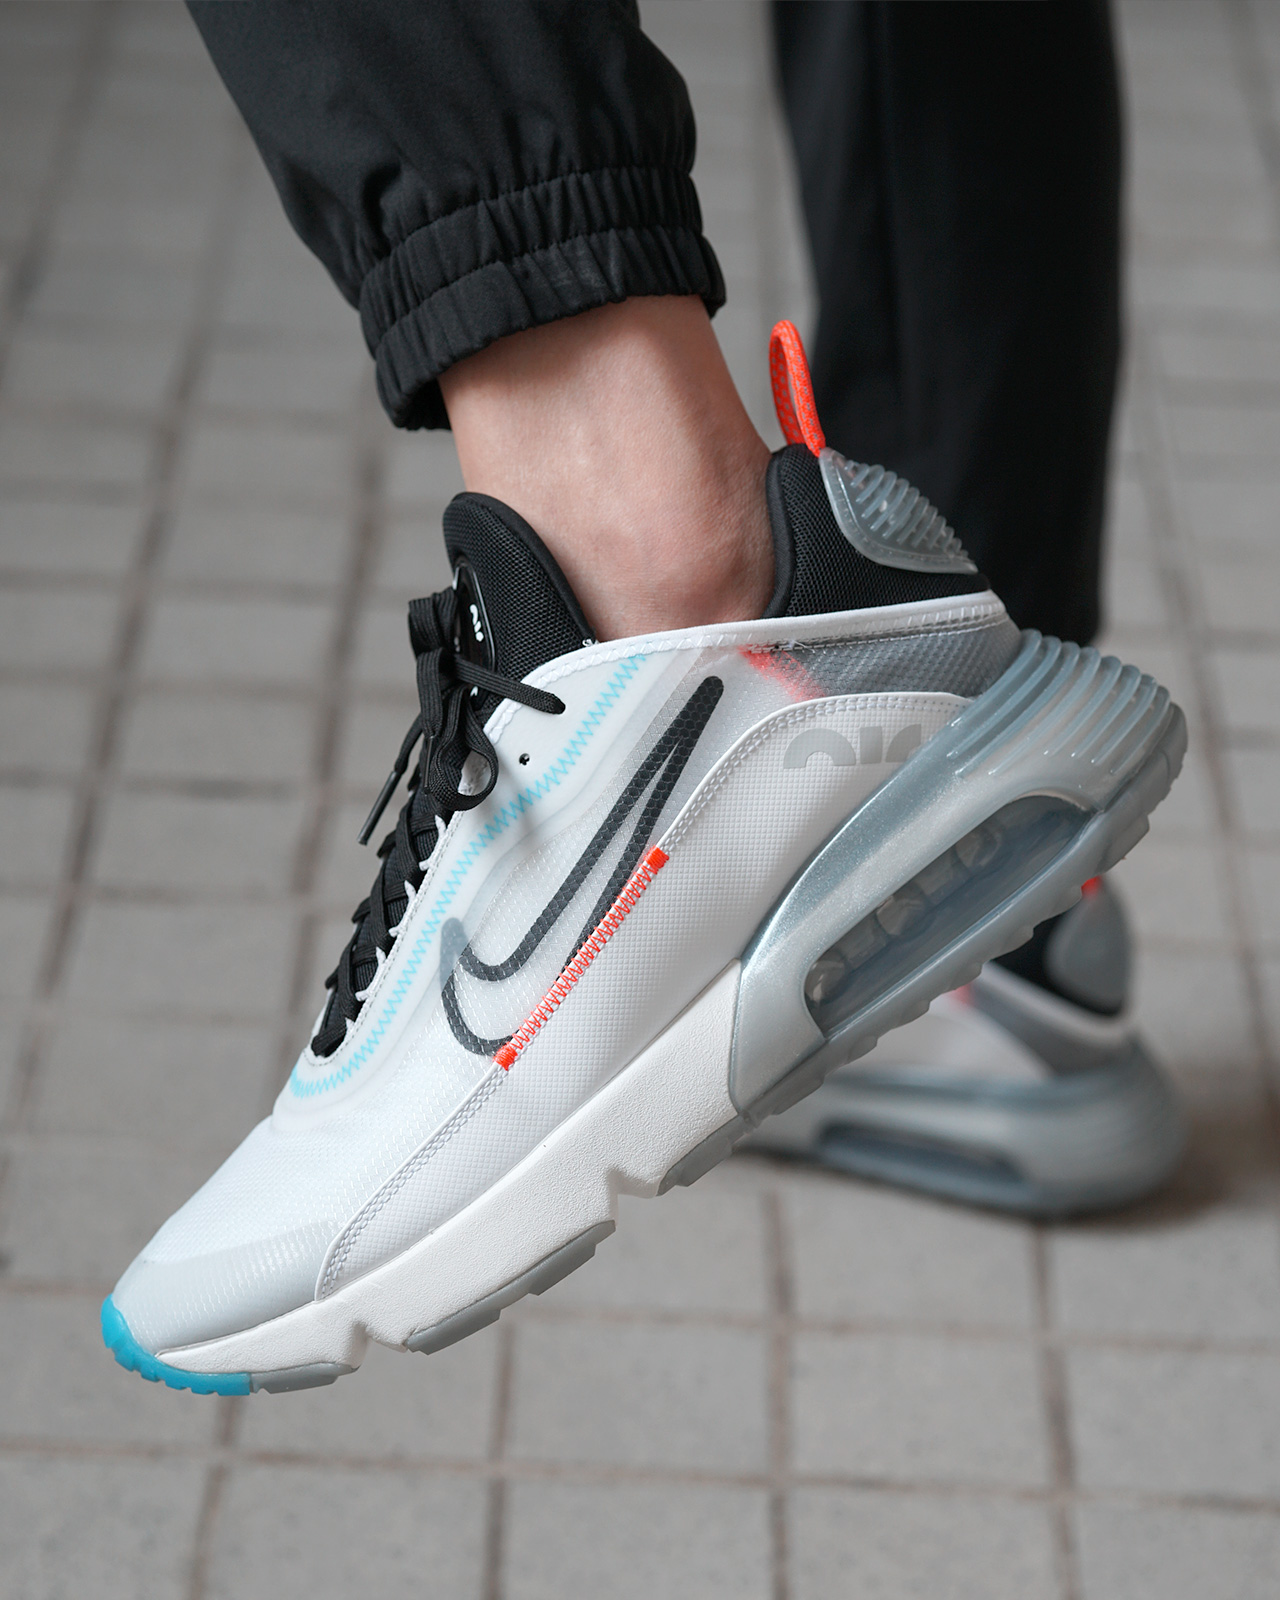 Nike Air Max 2090 review: Incredibly comfortable everyday sneakers